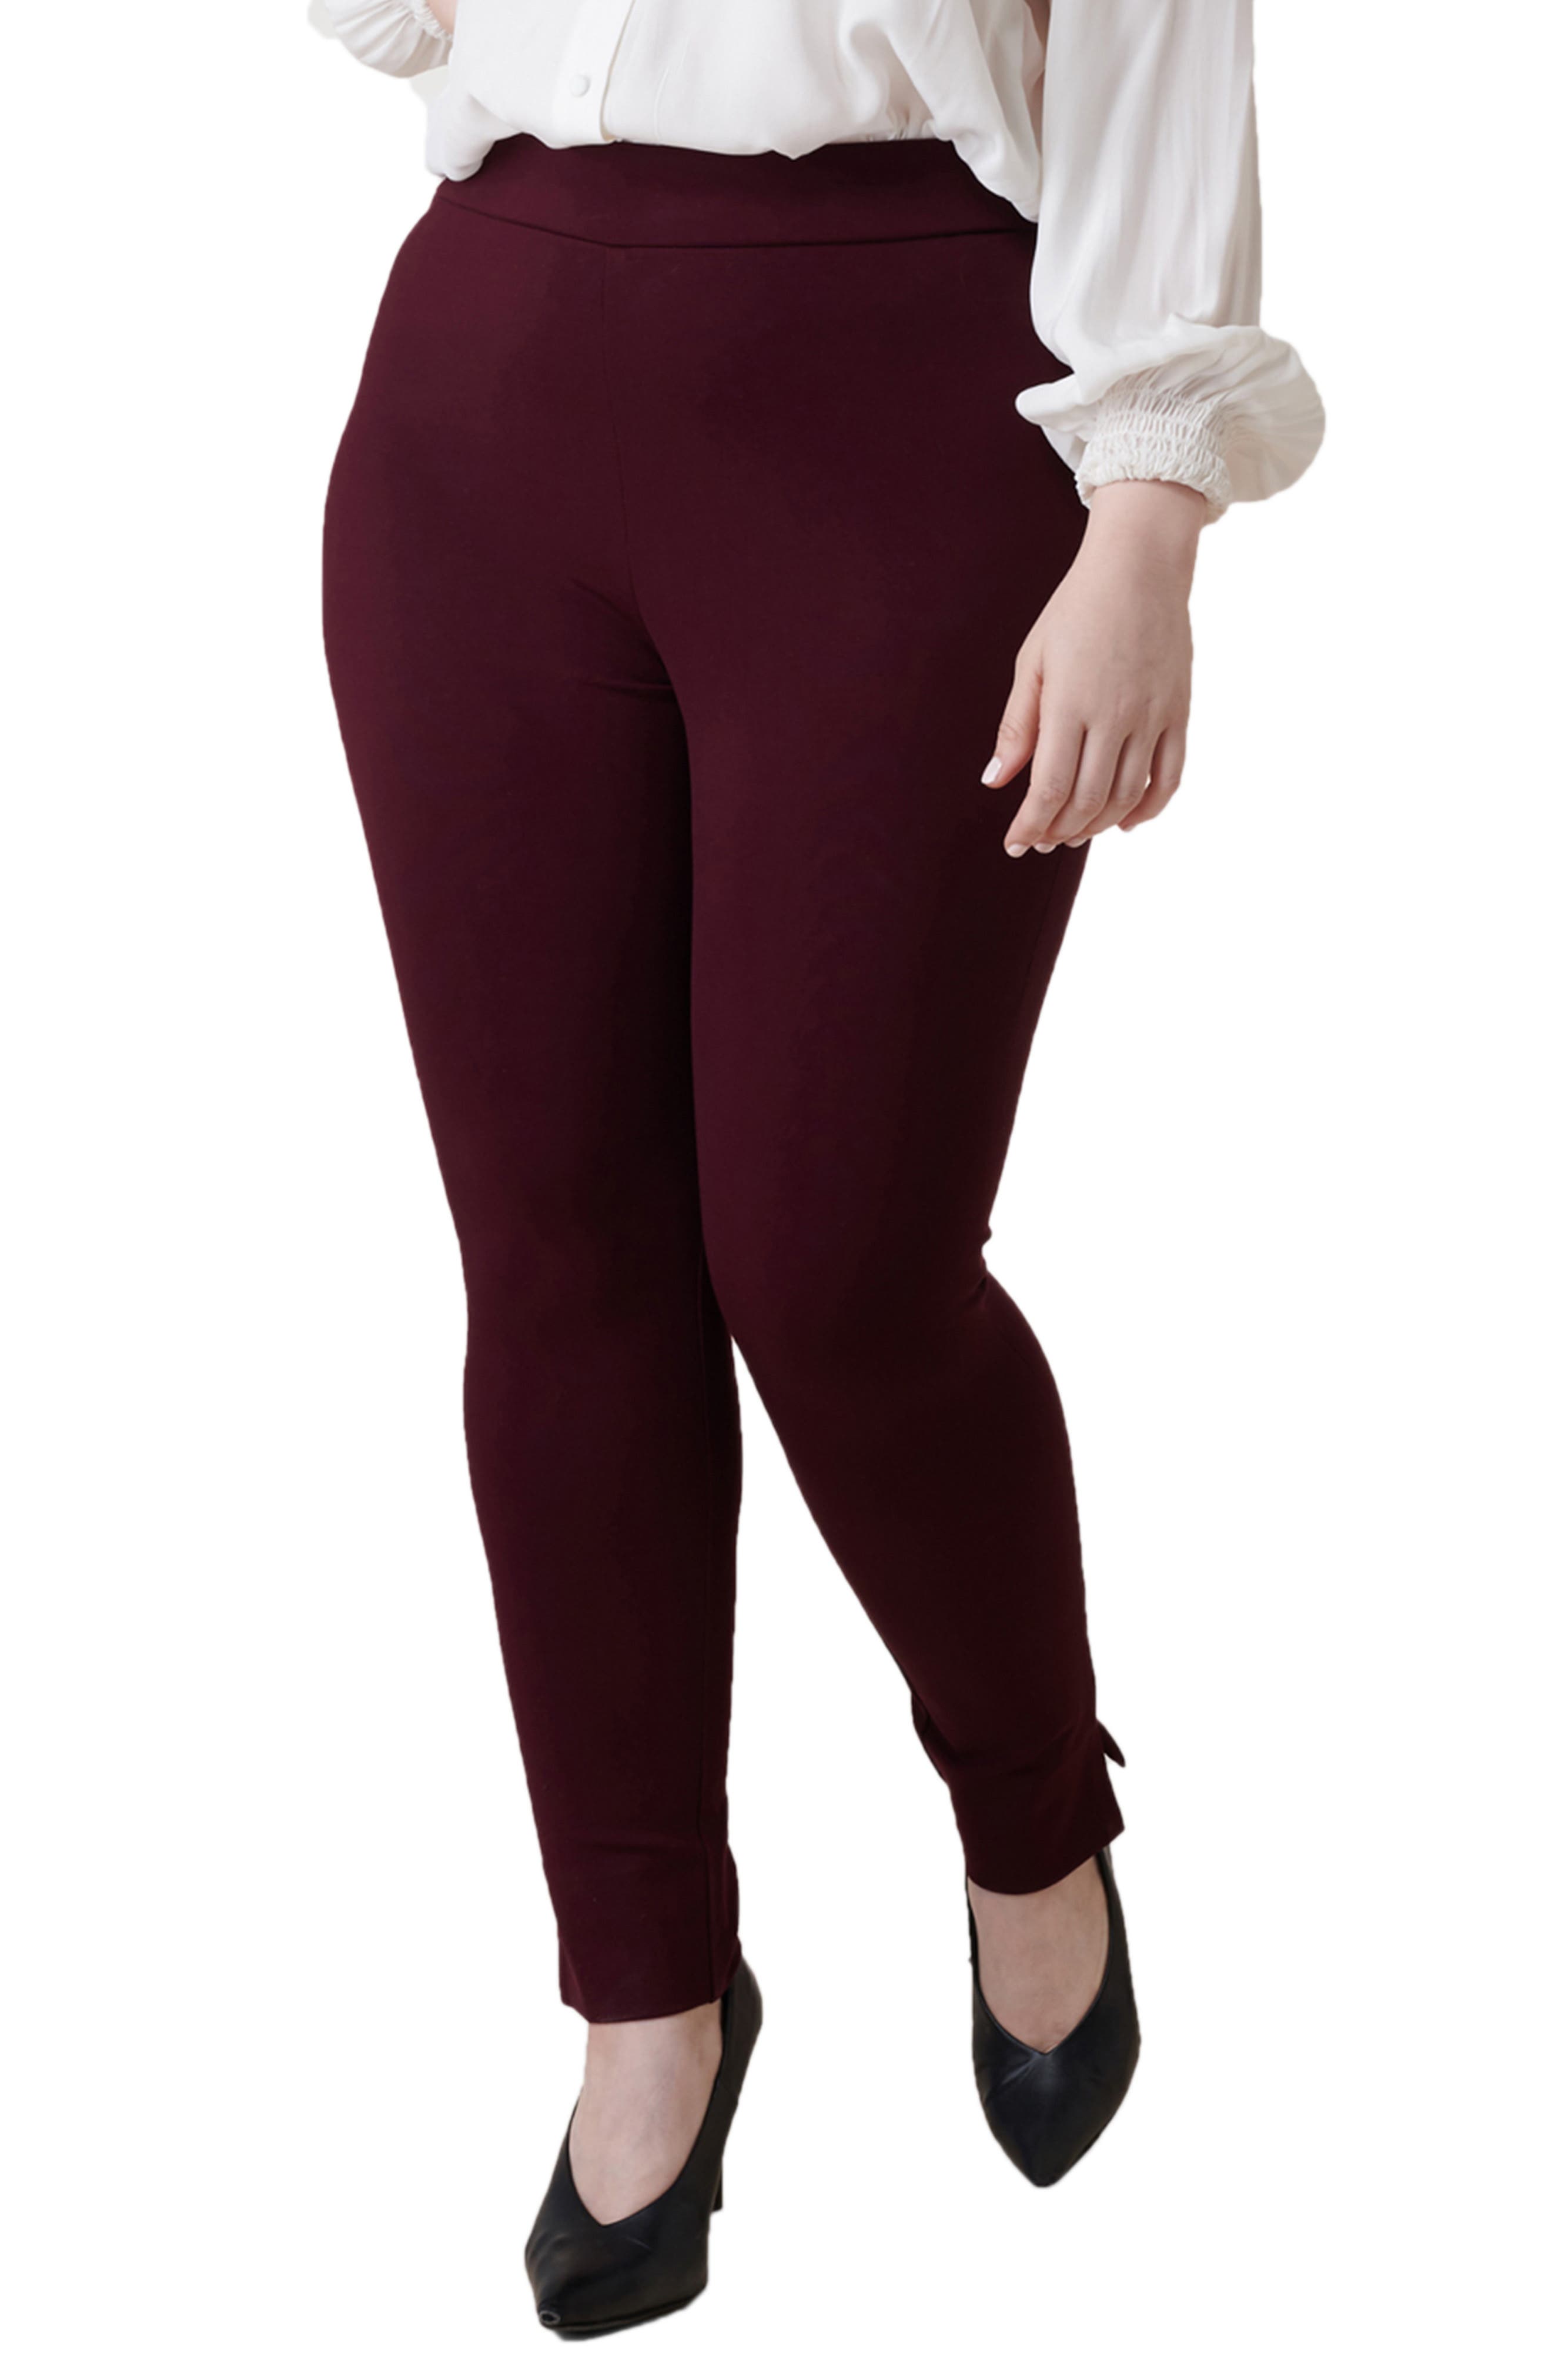 plus size women's business casual clothing stores